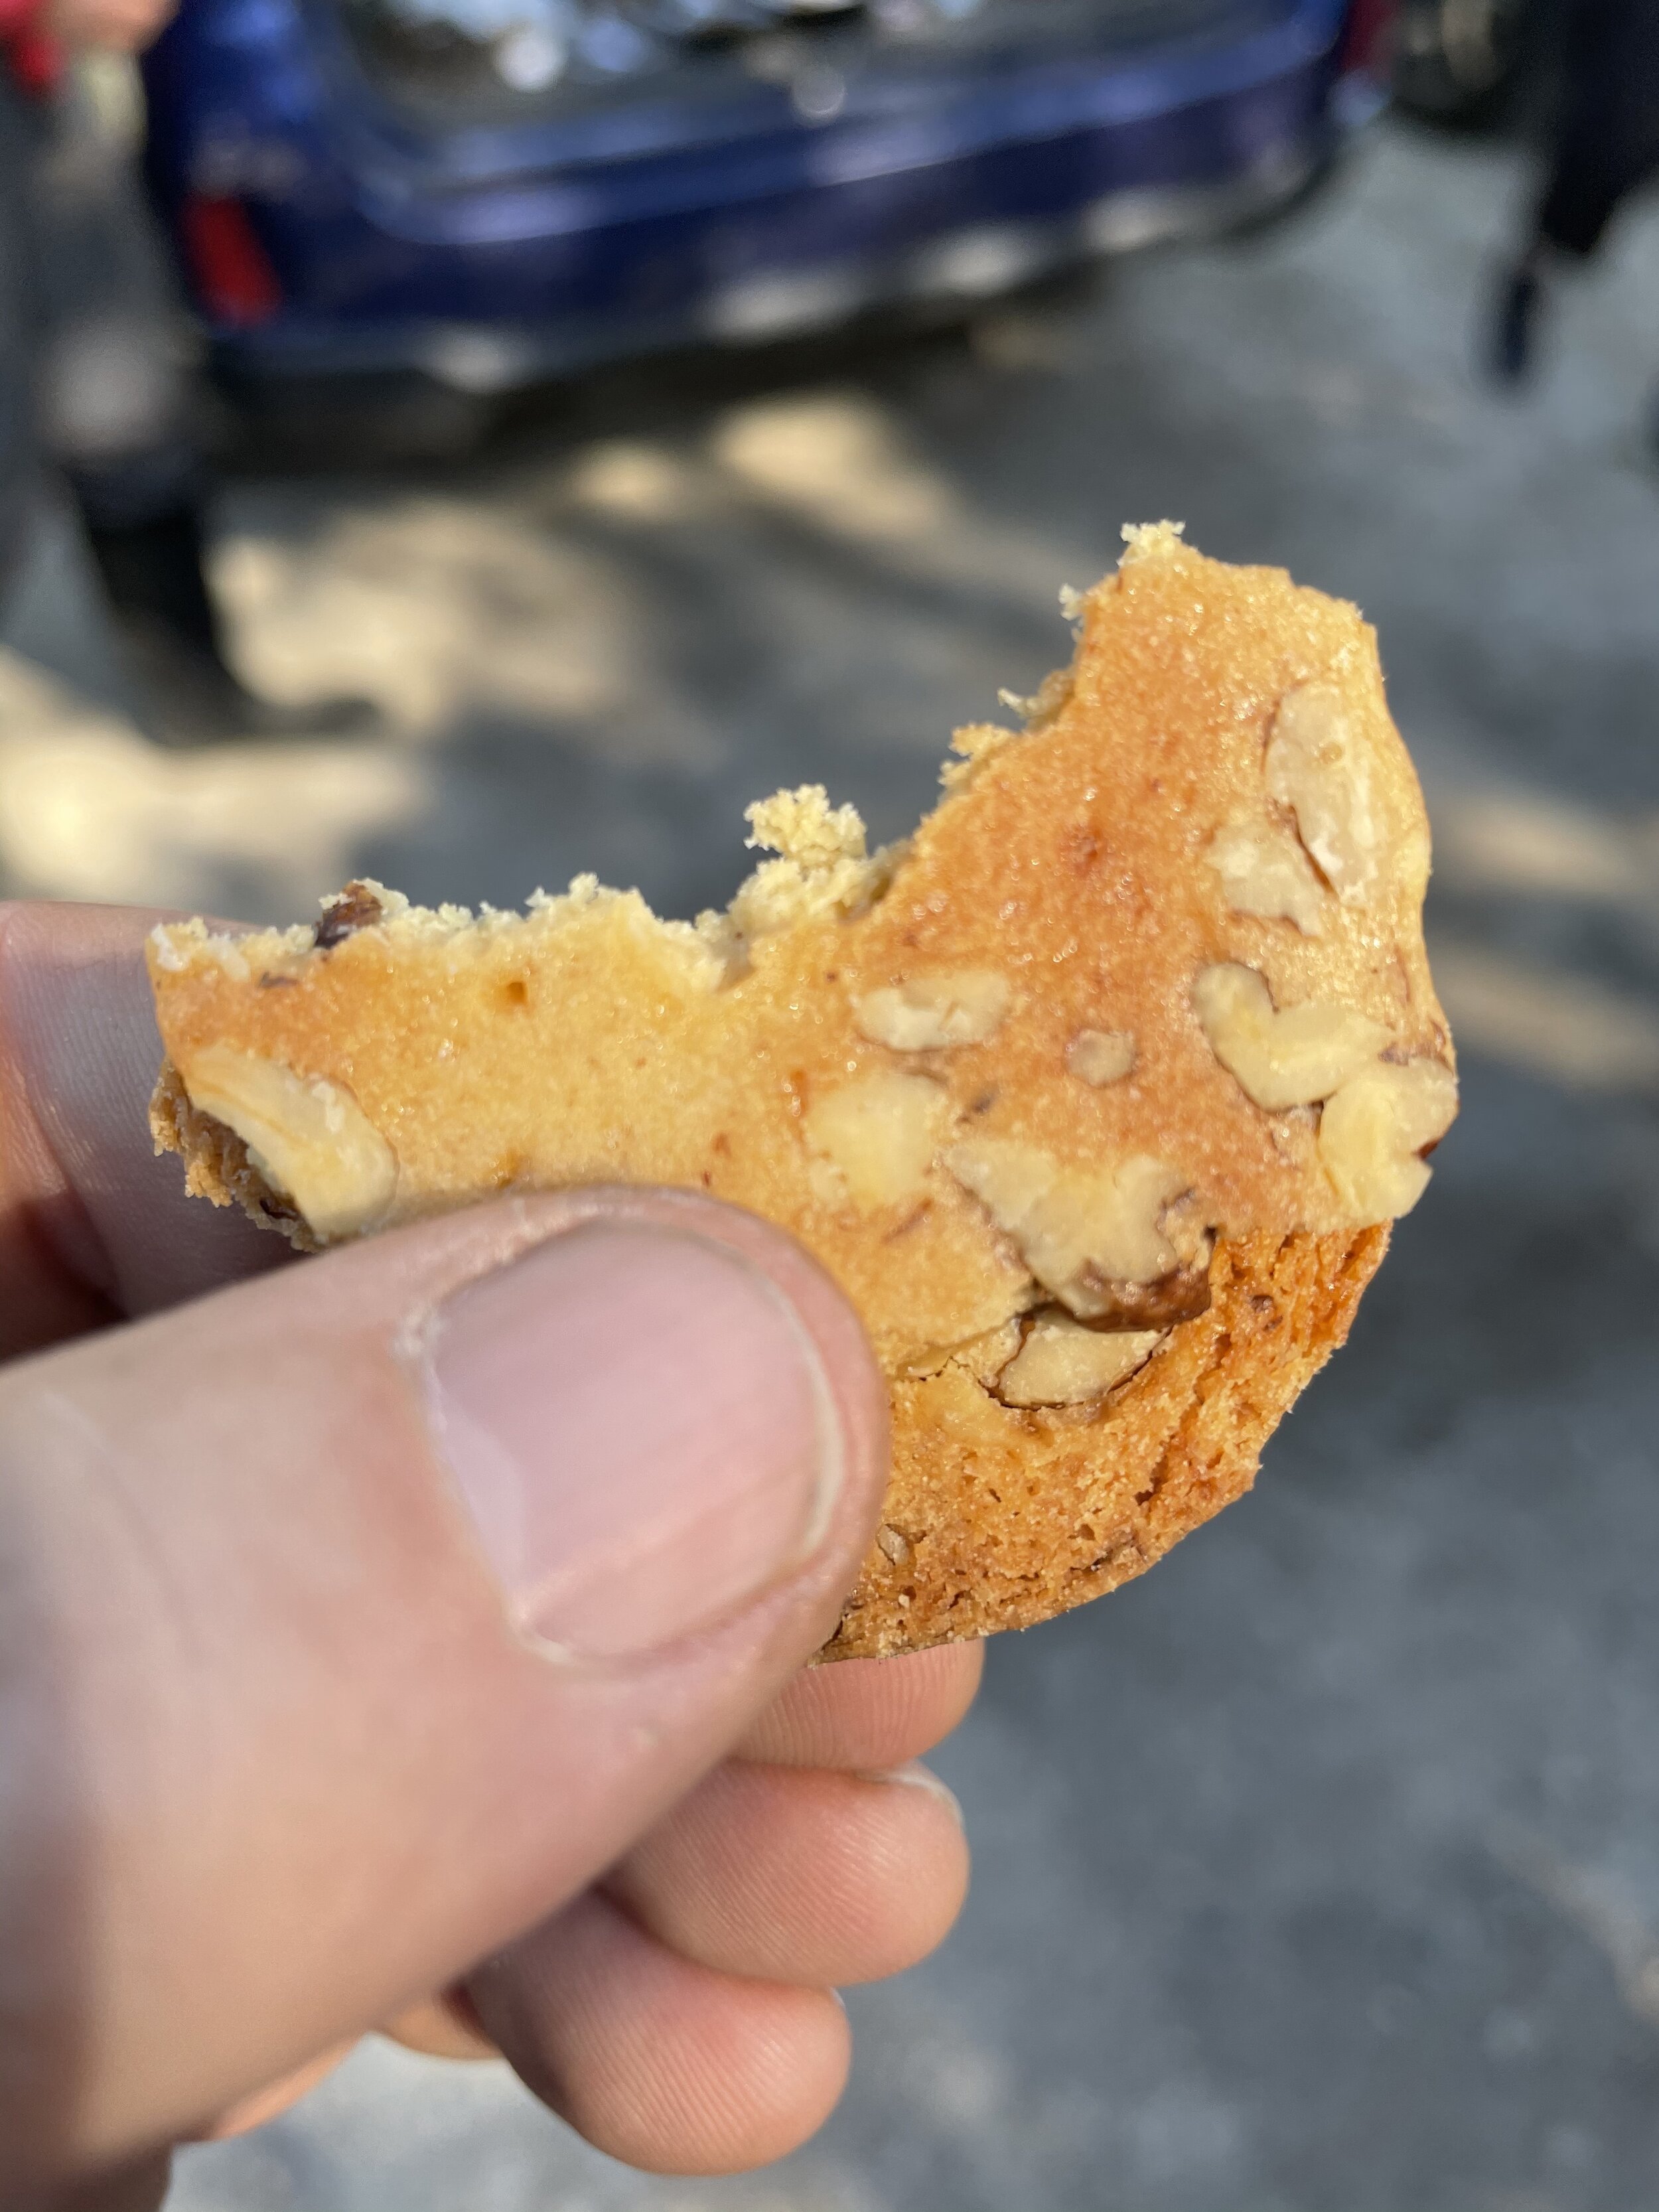  Russ brought some absolutely delicious Shagbark Hickory Nut Maple cookies as a reward for getting to the end of the walk!  